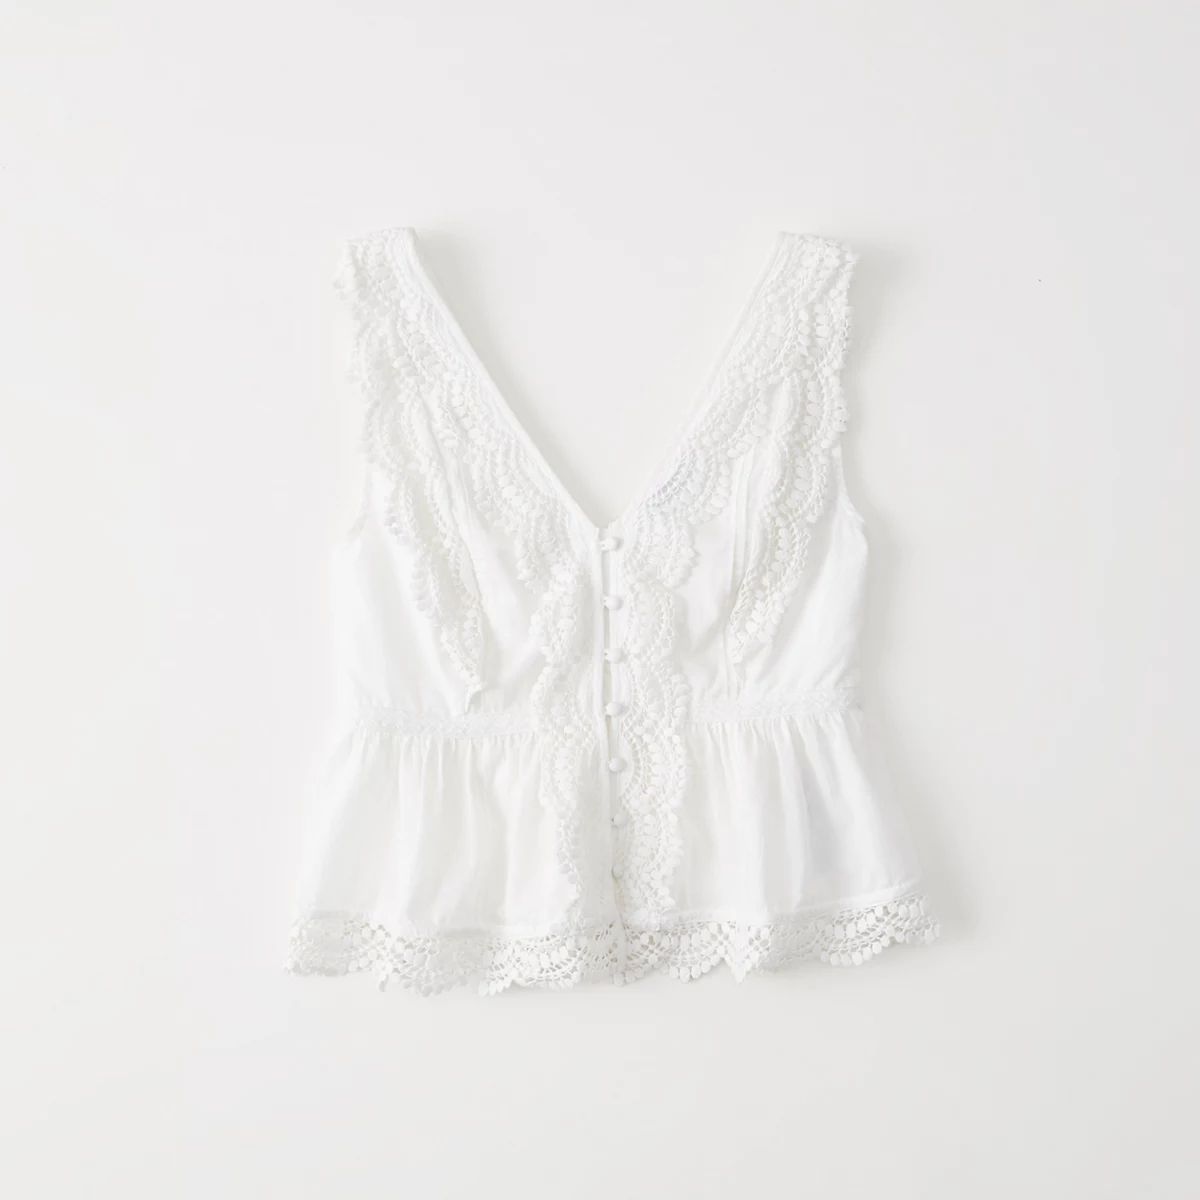 All-Over Lace Top | Abercrombie & Fitch US & UK